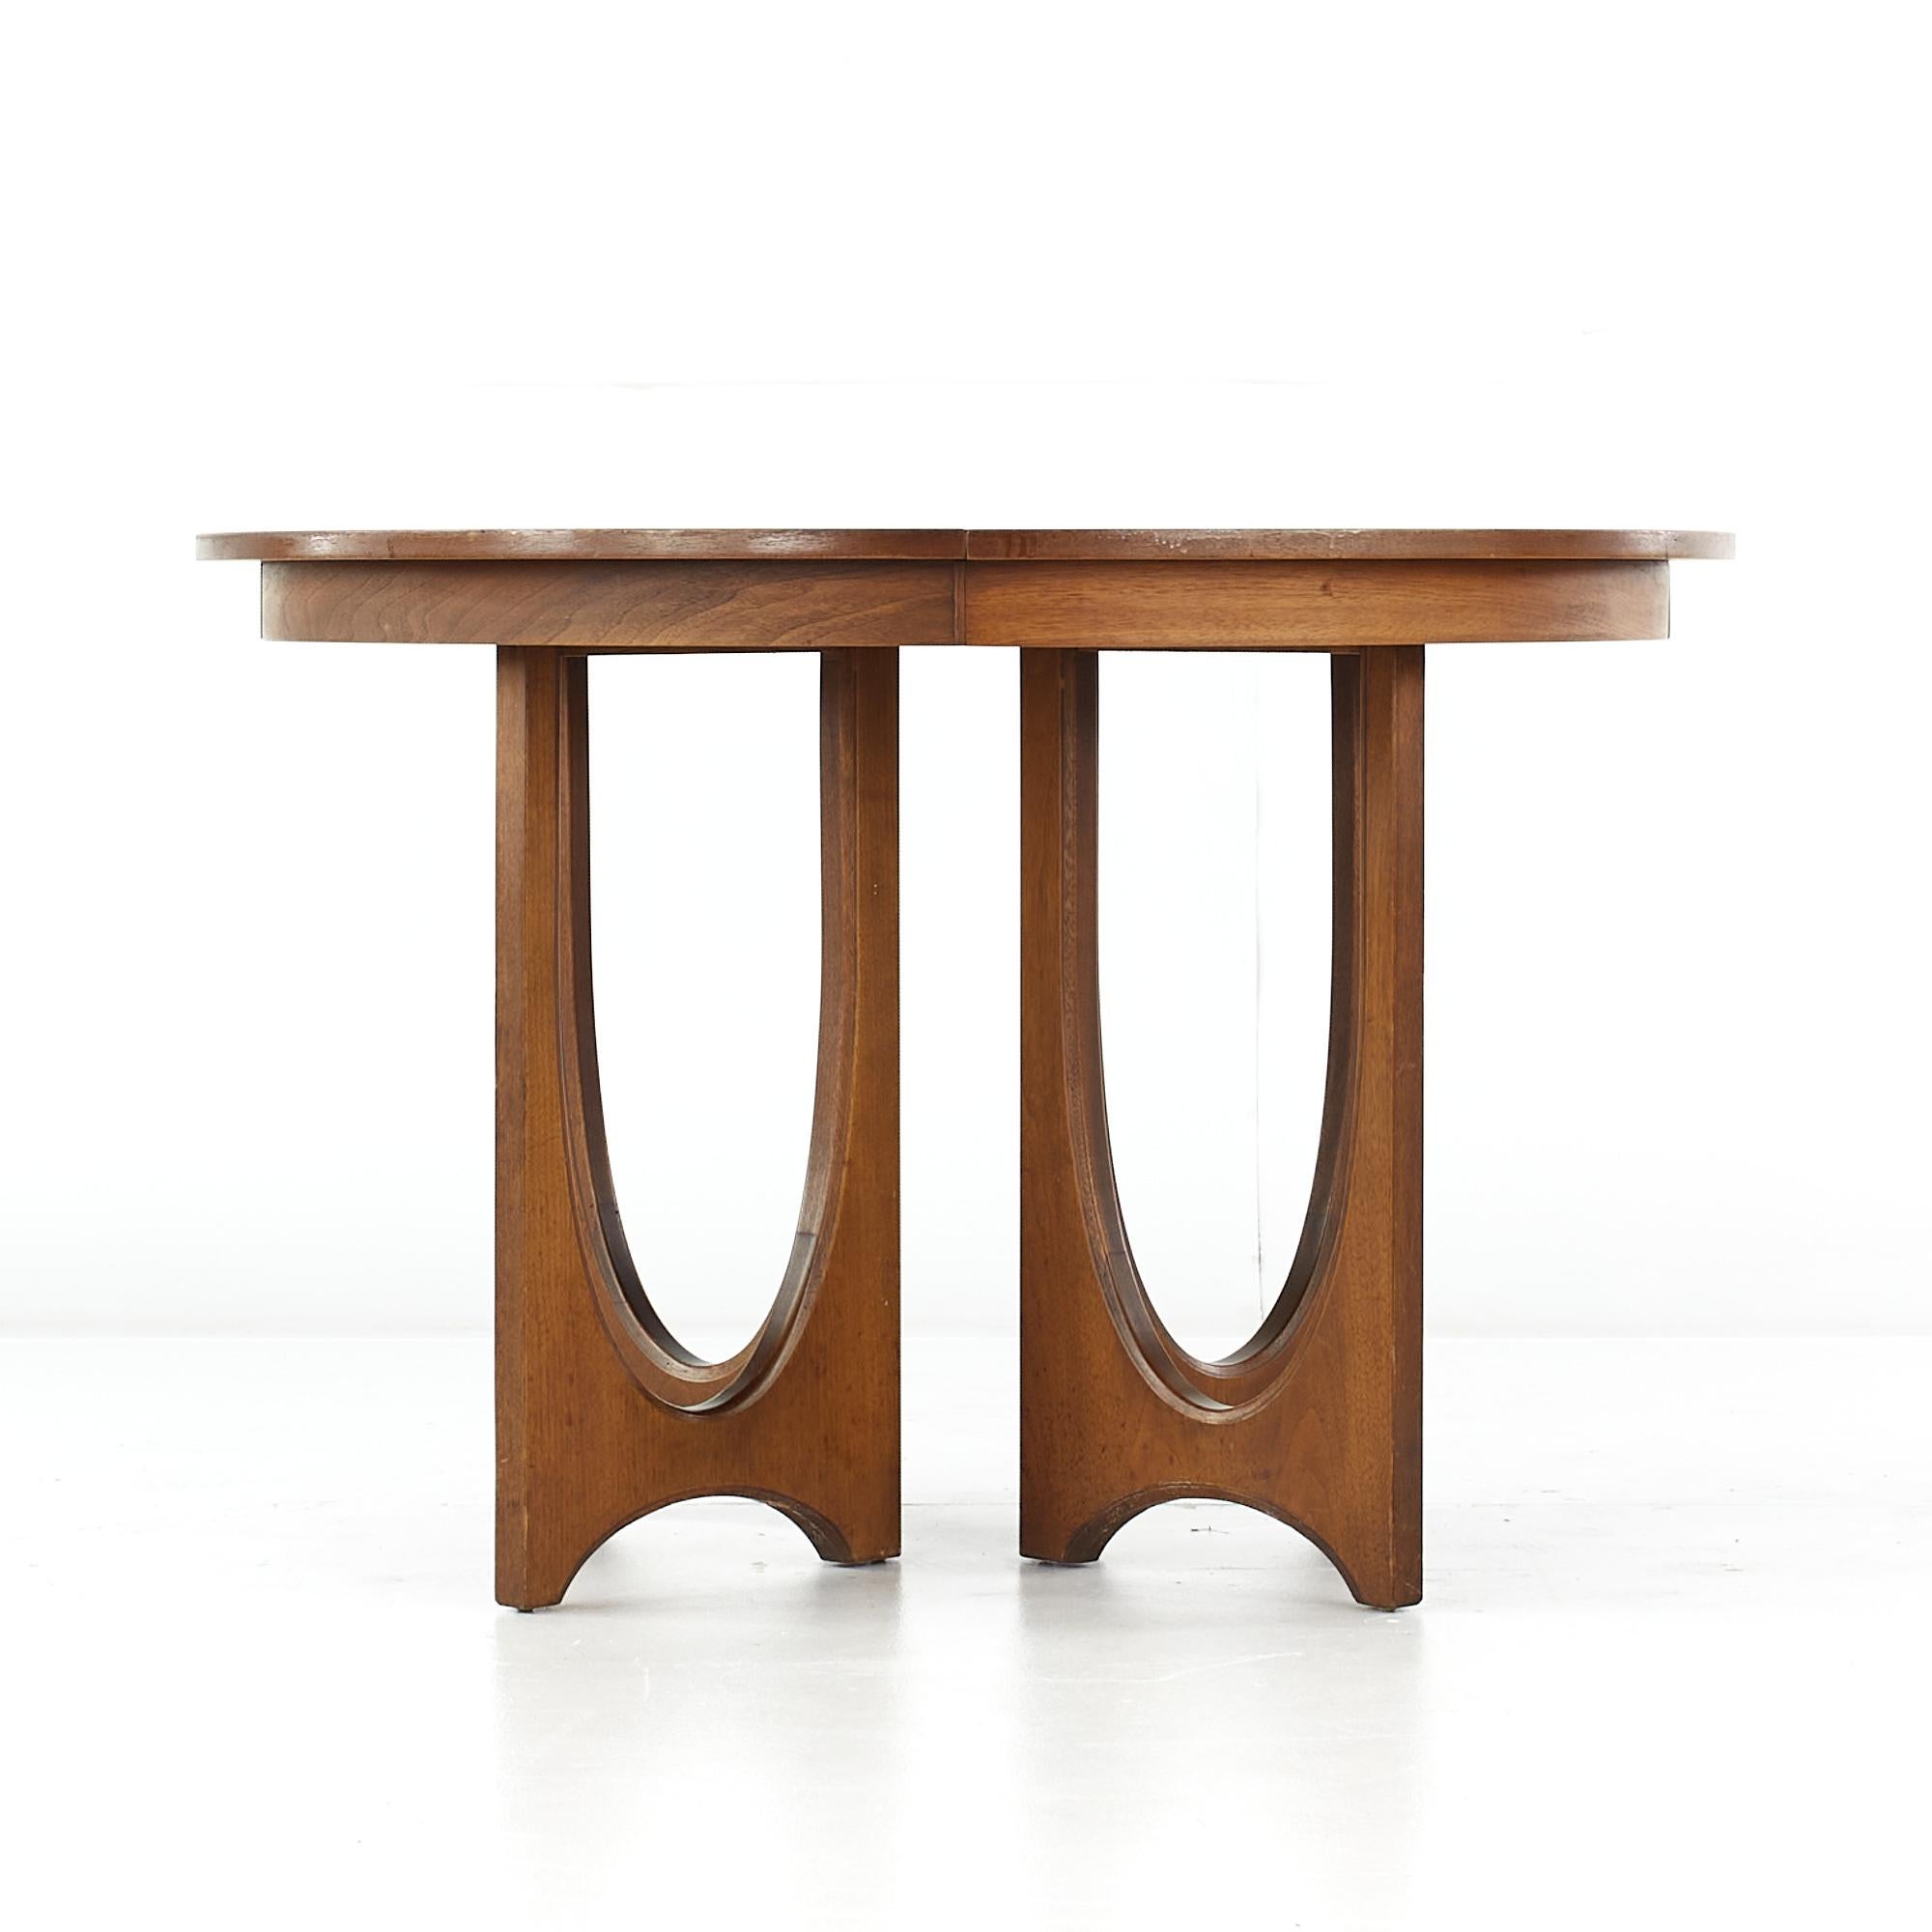 Broyhill Brasilia mid-century pedestal dining table with 1 leaf.

This table measures: 44 wide x 44.5 deep x 30 high, with a chair clearance of 26.75 inches, the leaf measures 12 inches wide, making a maximum table width of 56 inches when the leaf